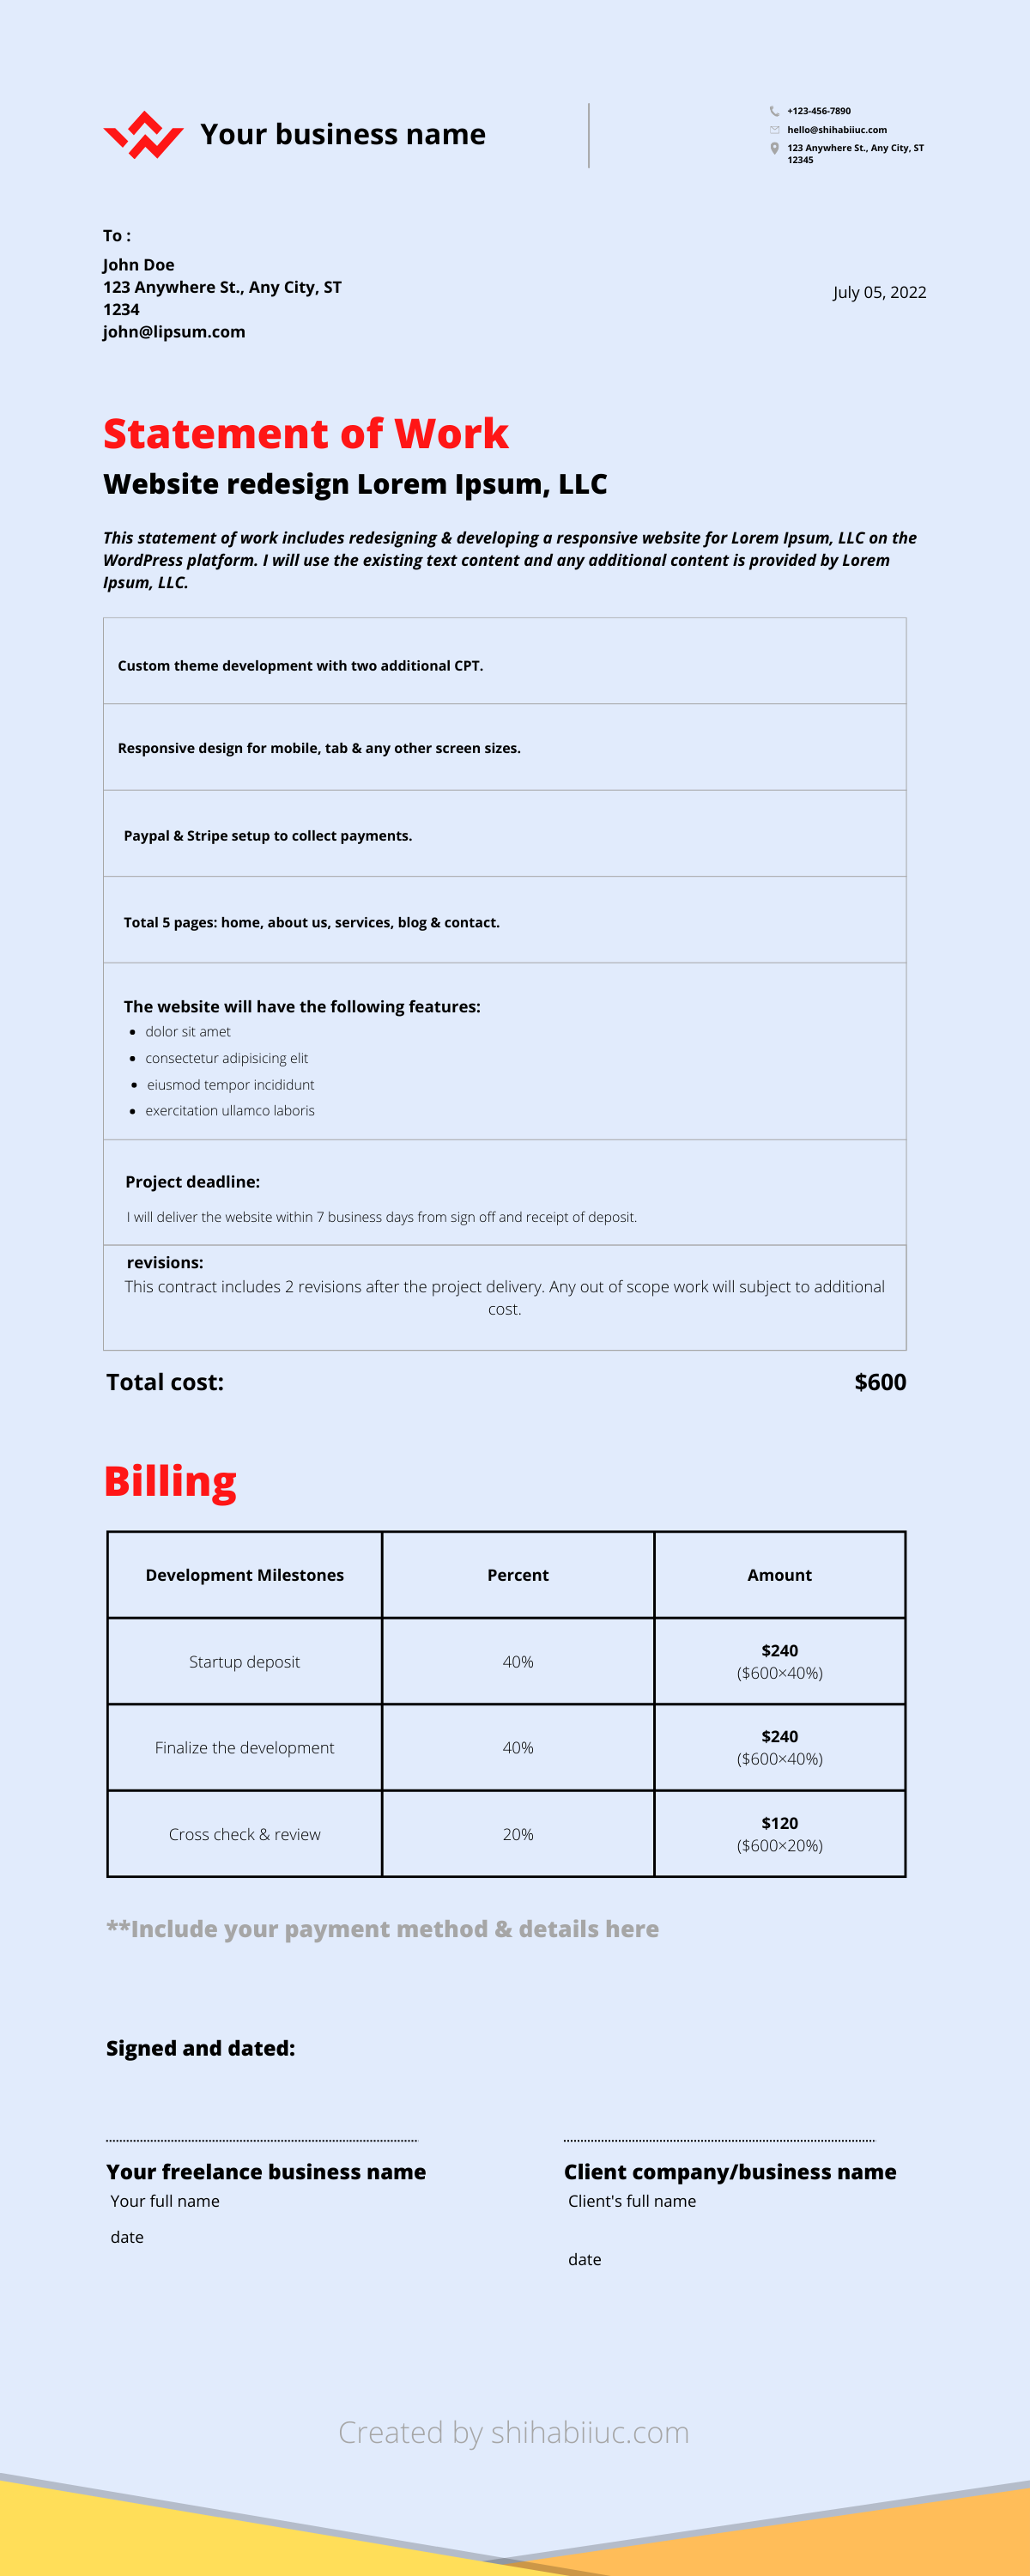 An infographic of a freelance contract